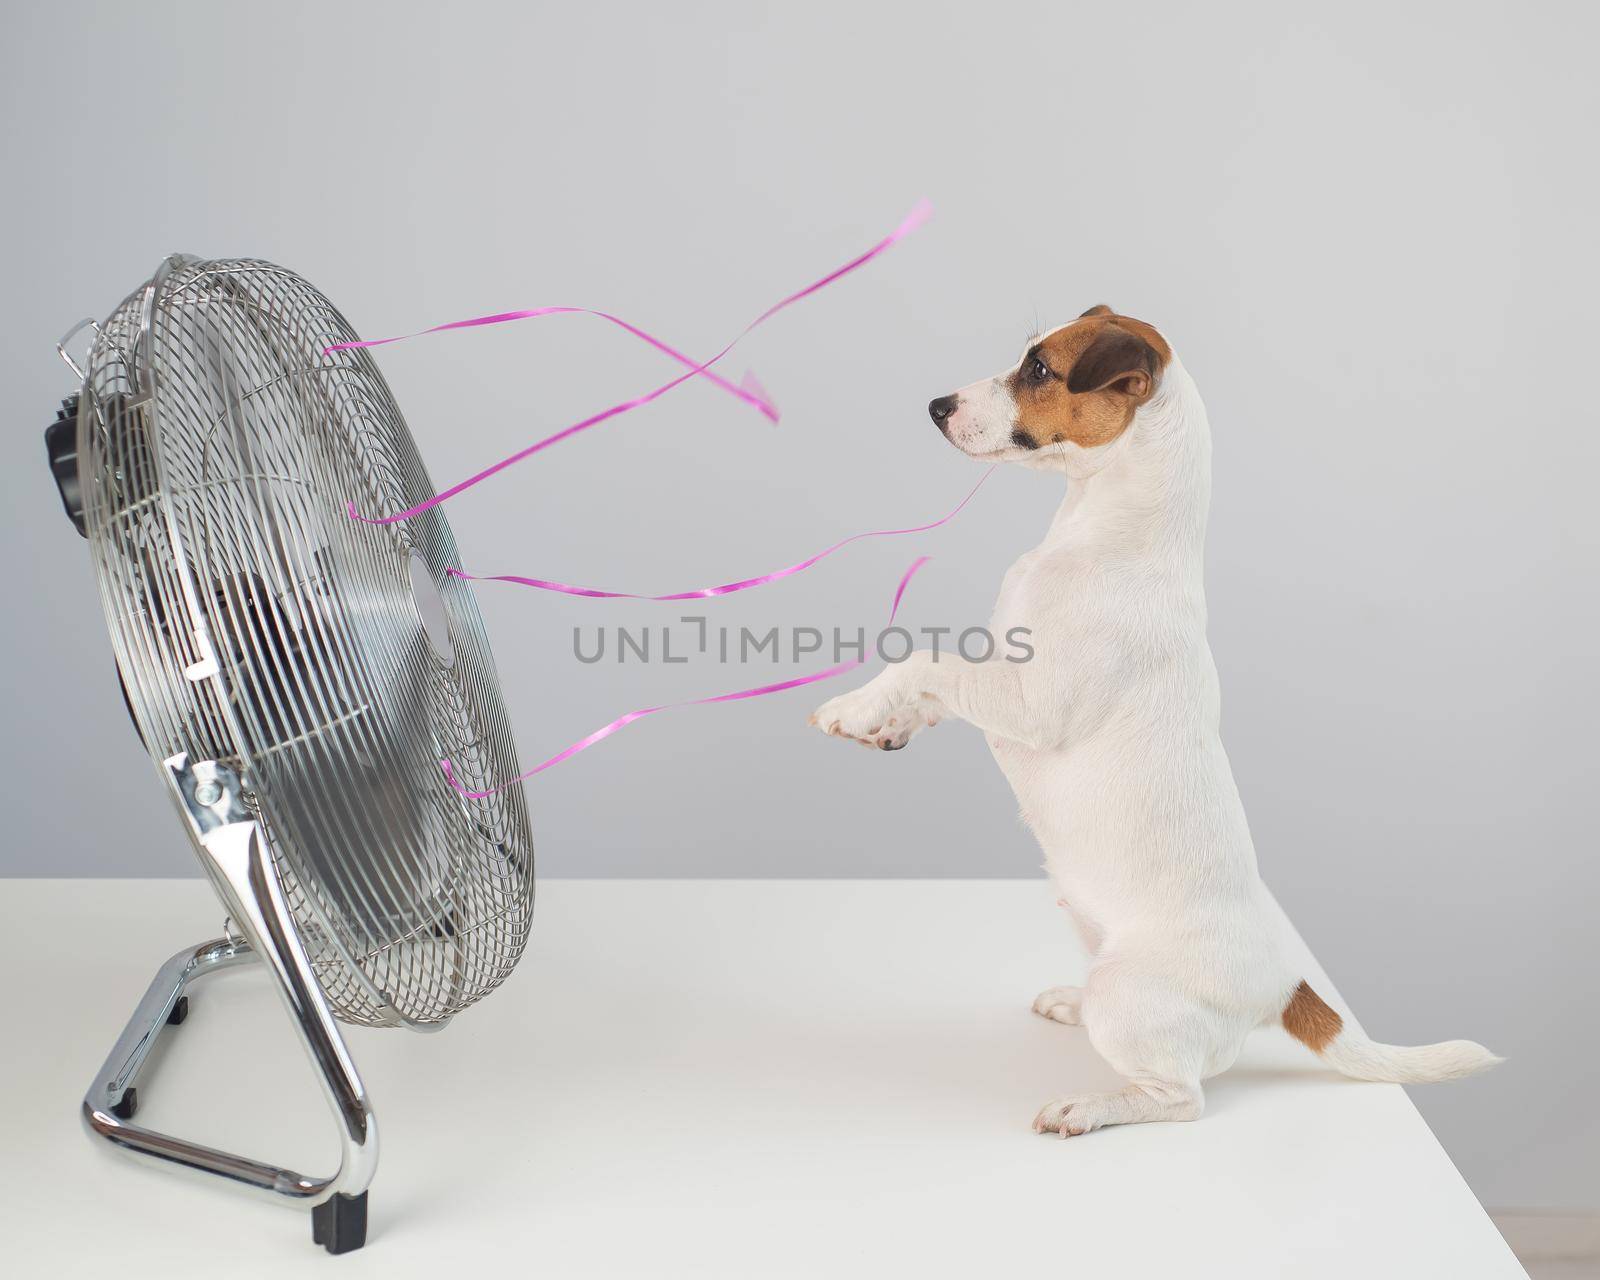 Jack russell terrier dog sits enjoying the cooling breeze from an electric fan on a white background